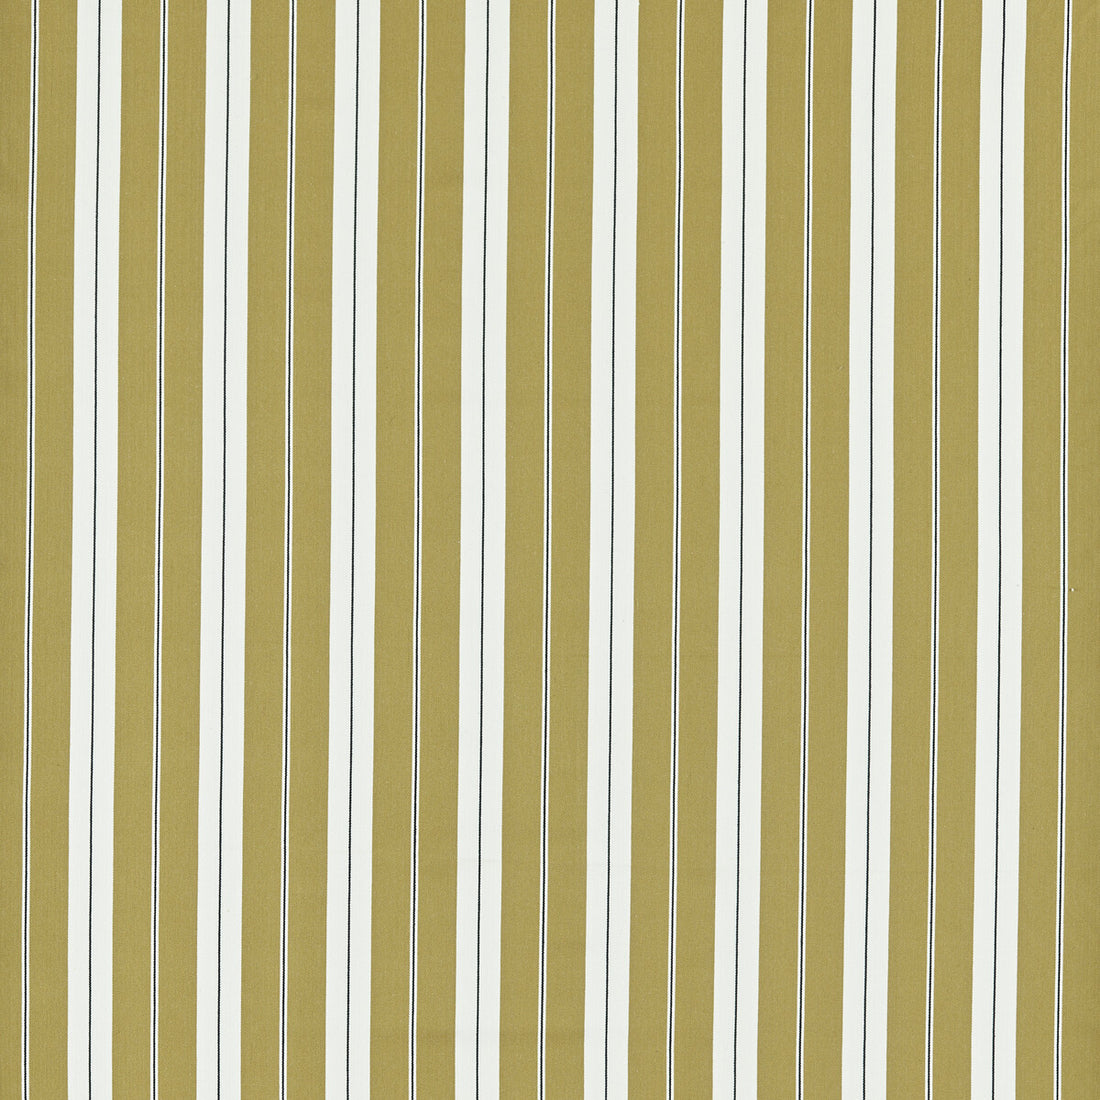 Belgravia fabric in ochre/charcoal color - pattern F1497/04.CAC.0 - by Clarke And Clarke in the Clarke &amp; Clarke Edgeworth collection